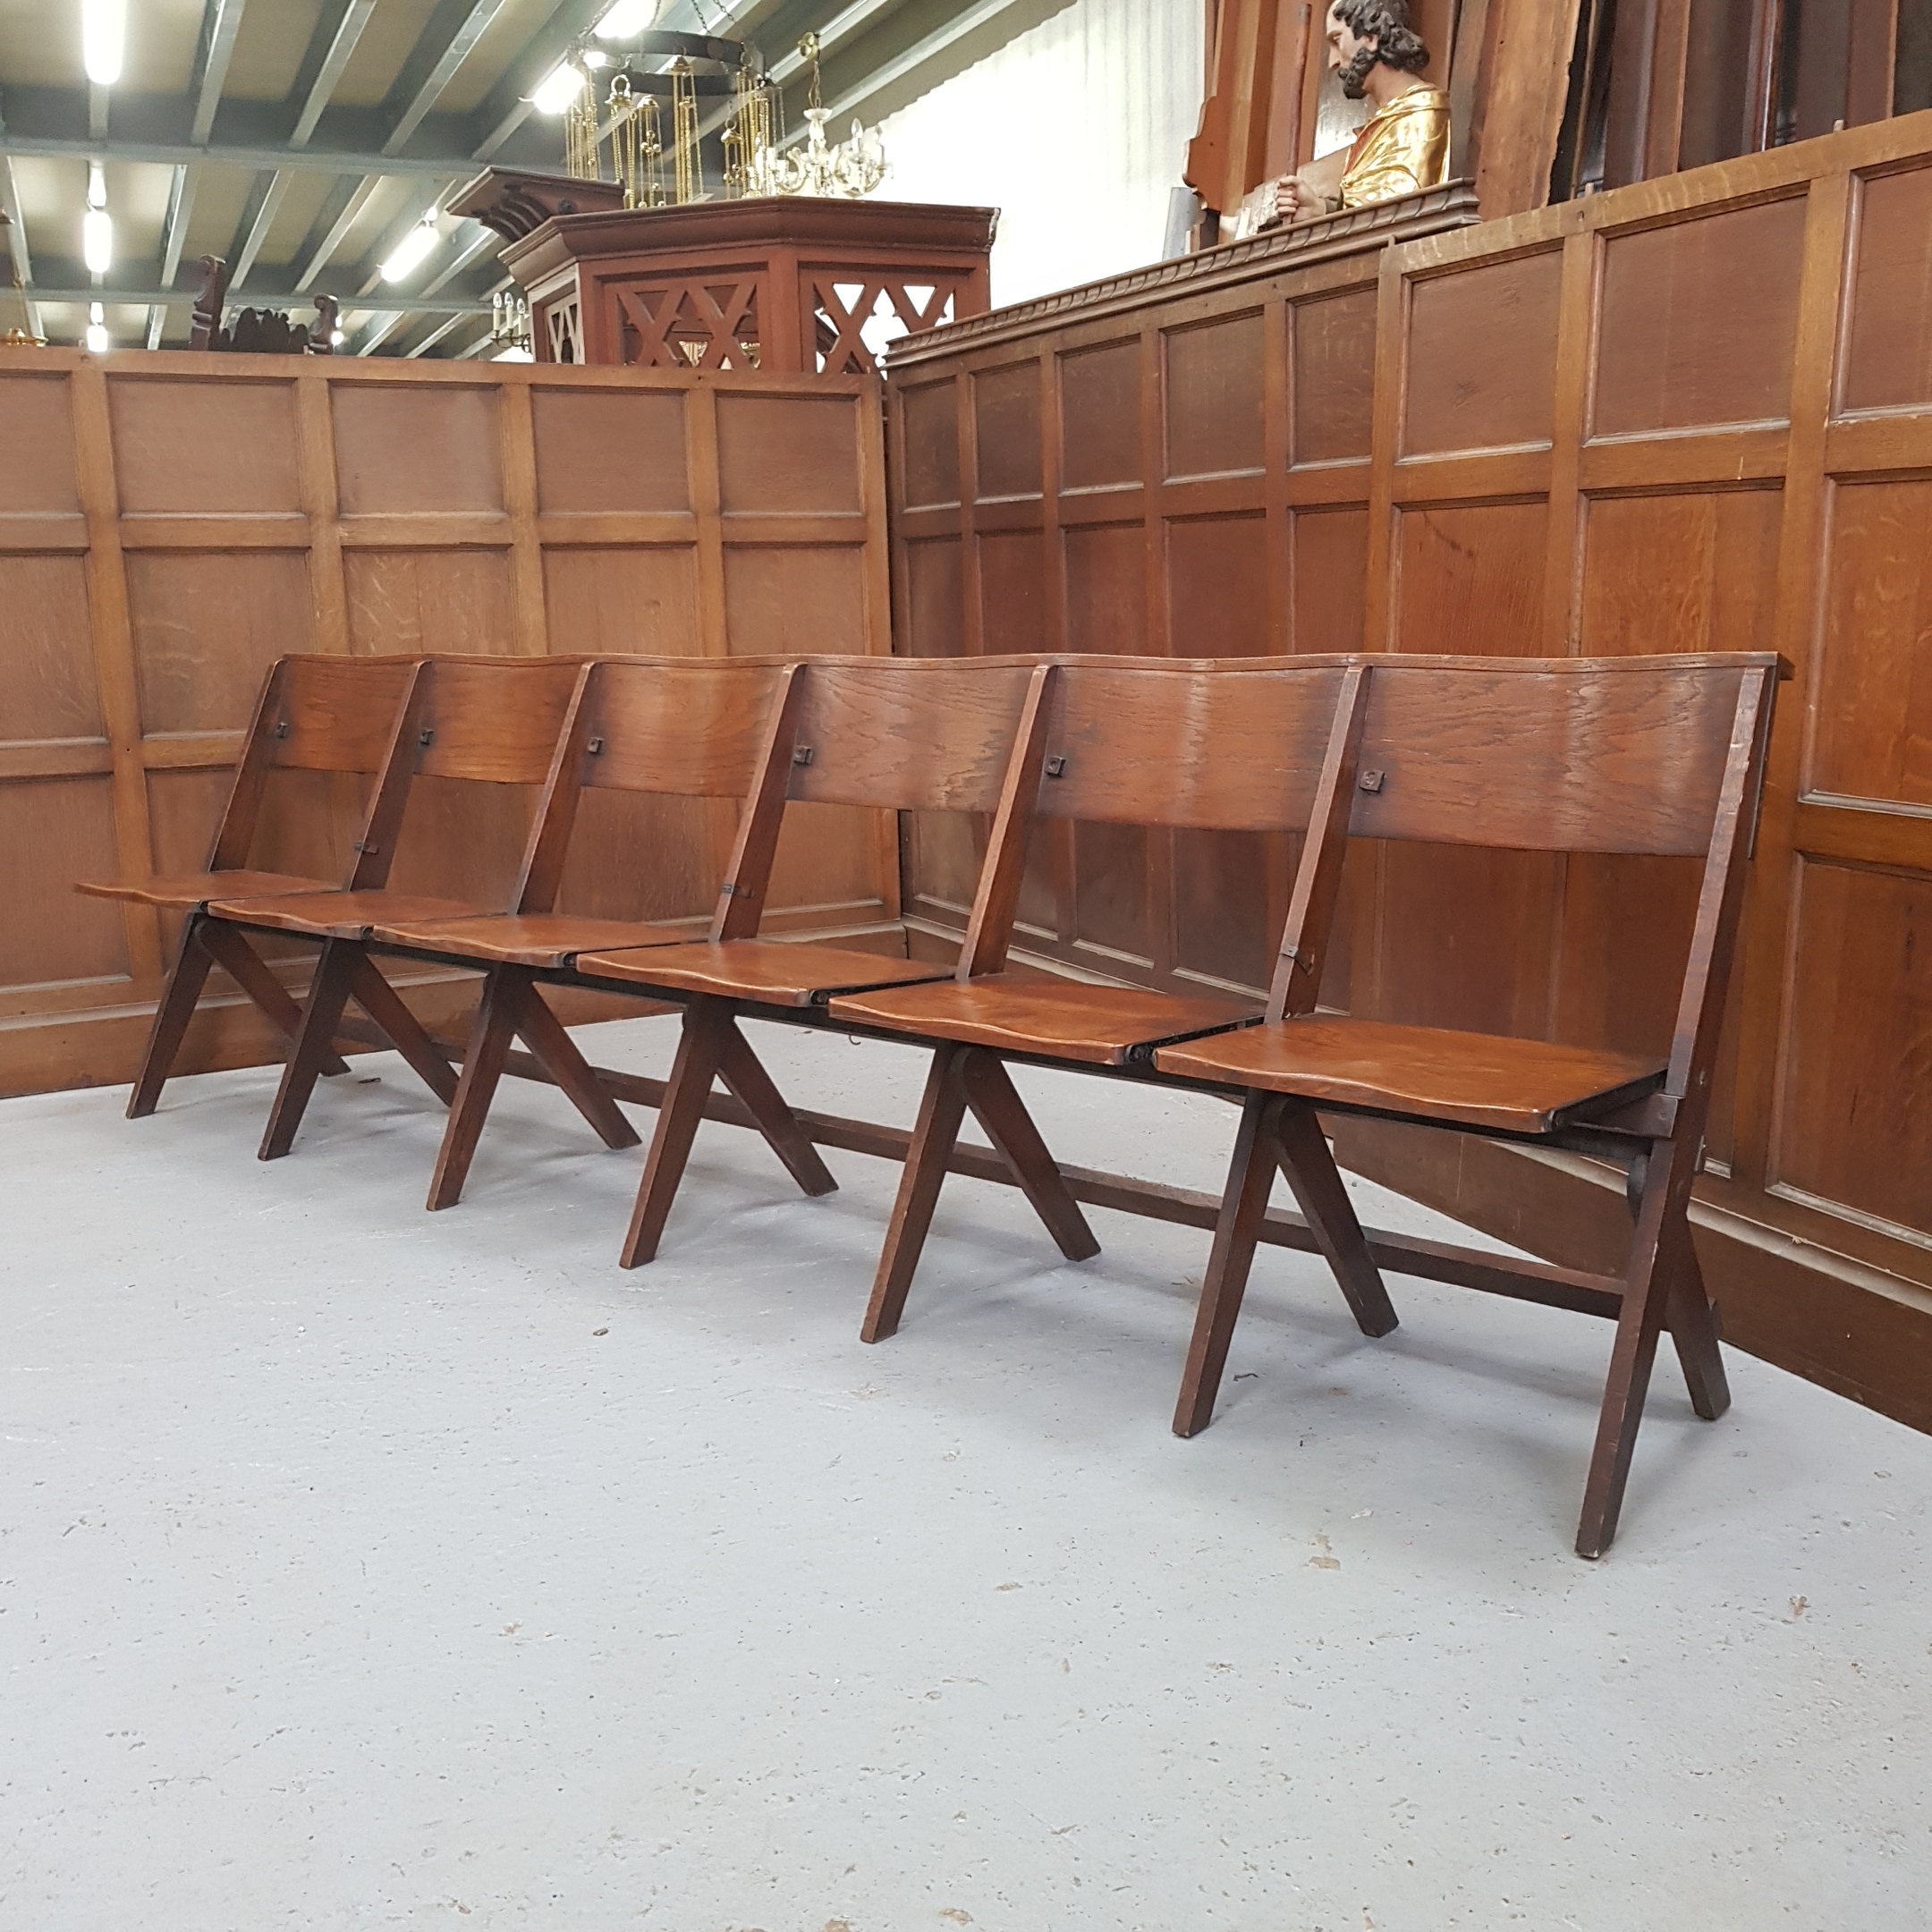 Secondhand Chairs And Tables Church Pews And Chairs 10x Oak 1930 S Classic Folding Benches 6 Seater Surrey